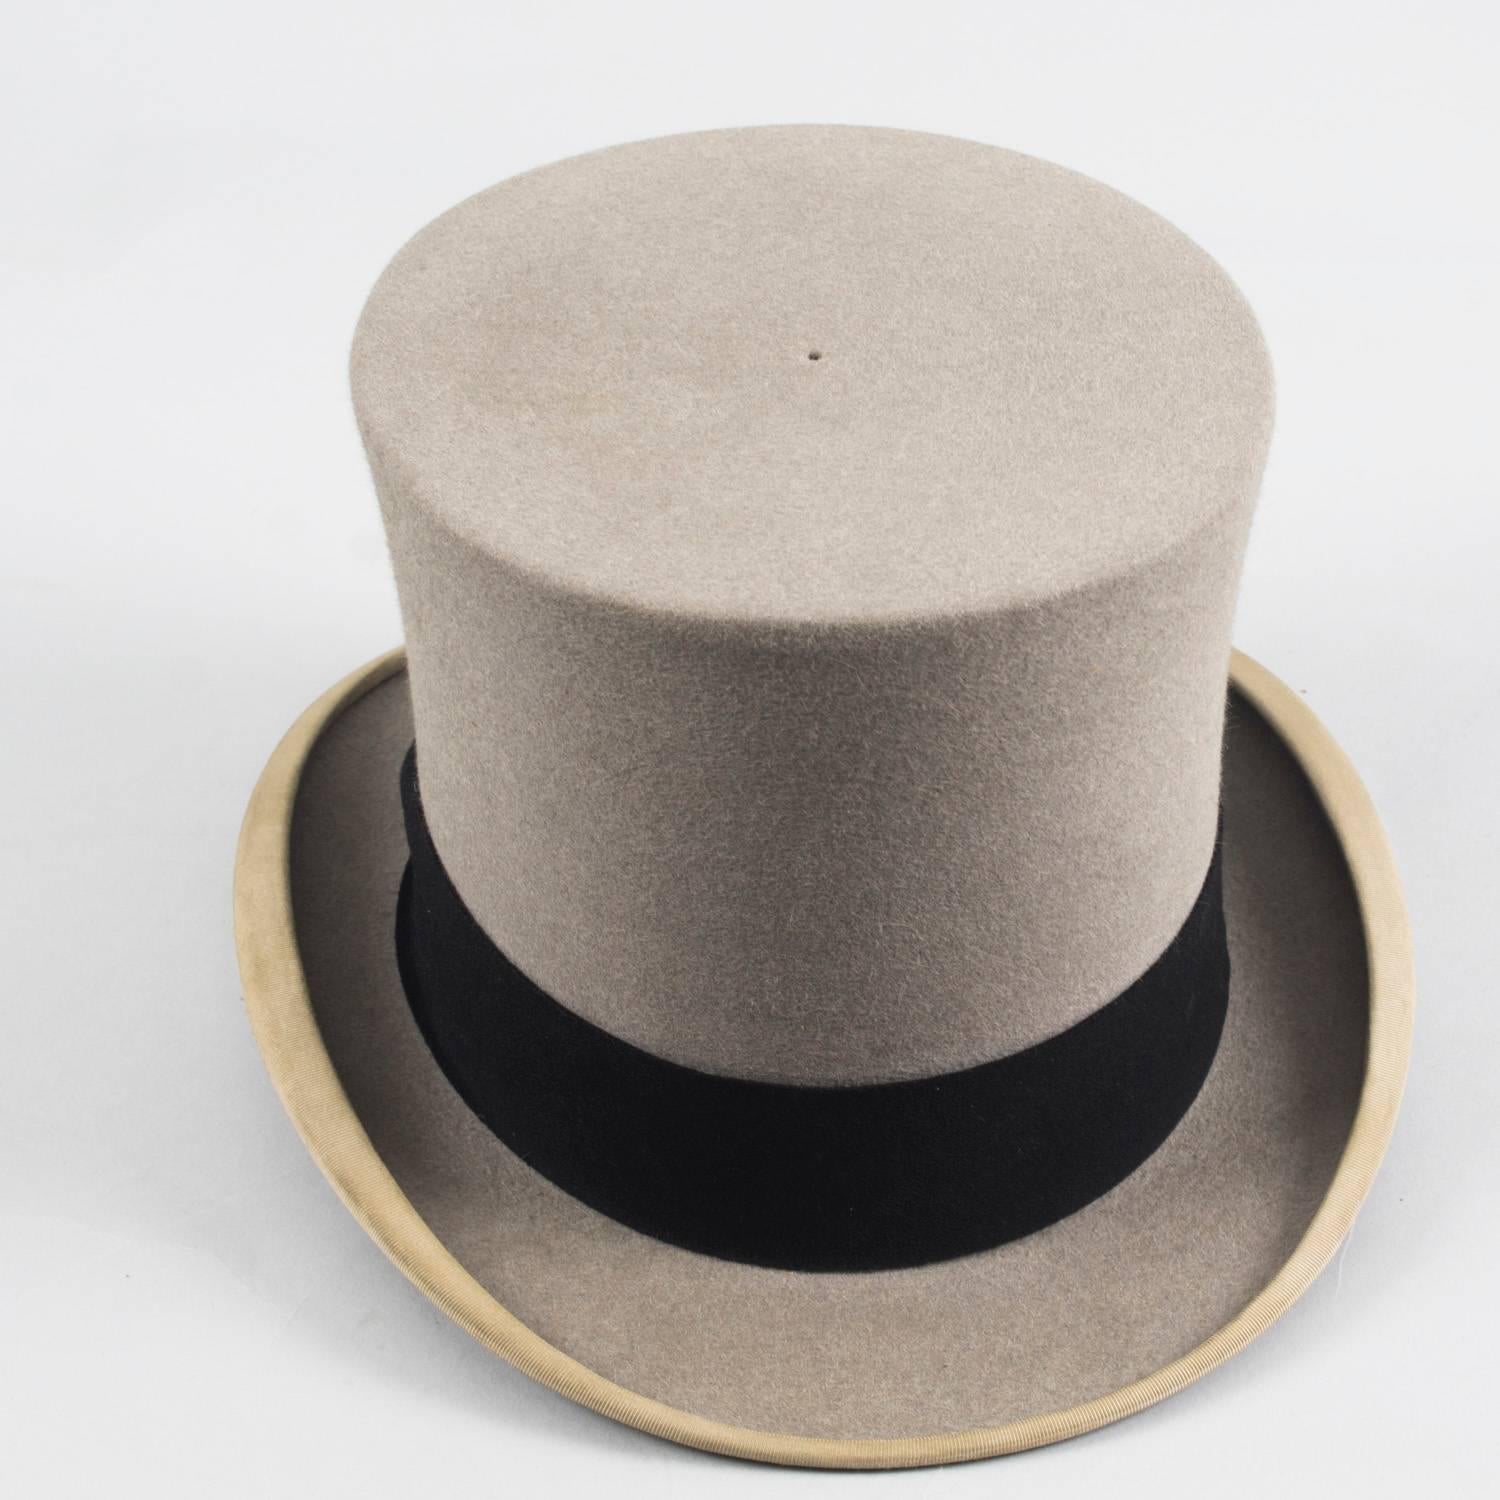 An excellent quality antique grey felt top hat by Scott & Co, 1 Bond Street, Piccadilly, circa 1920 in date.
Hat size 6 7/8 USA 55cm (21.5 inches)

The hat has classic styling and features the Royal Warrant By Appointment with the Coat of Arms crest